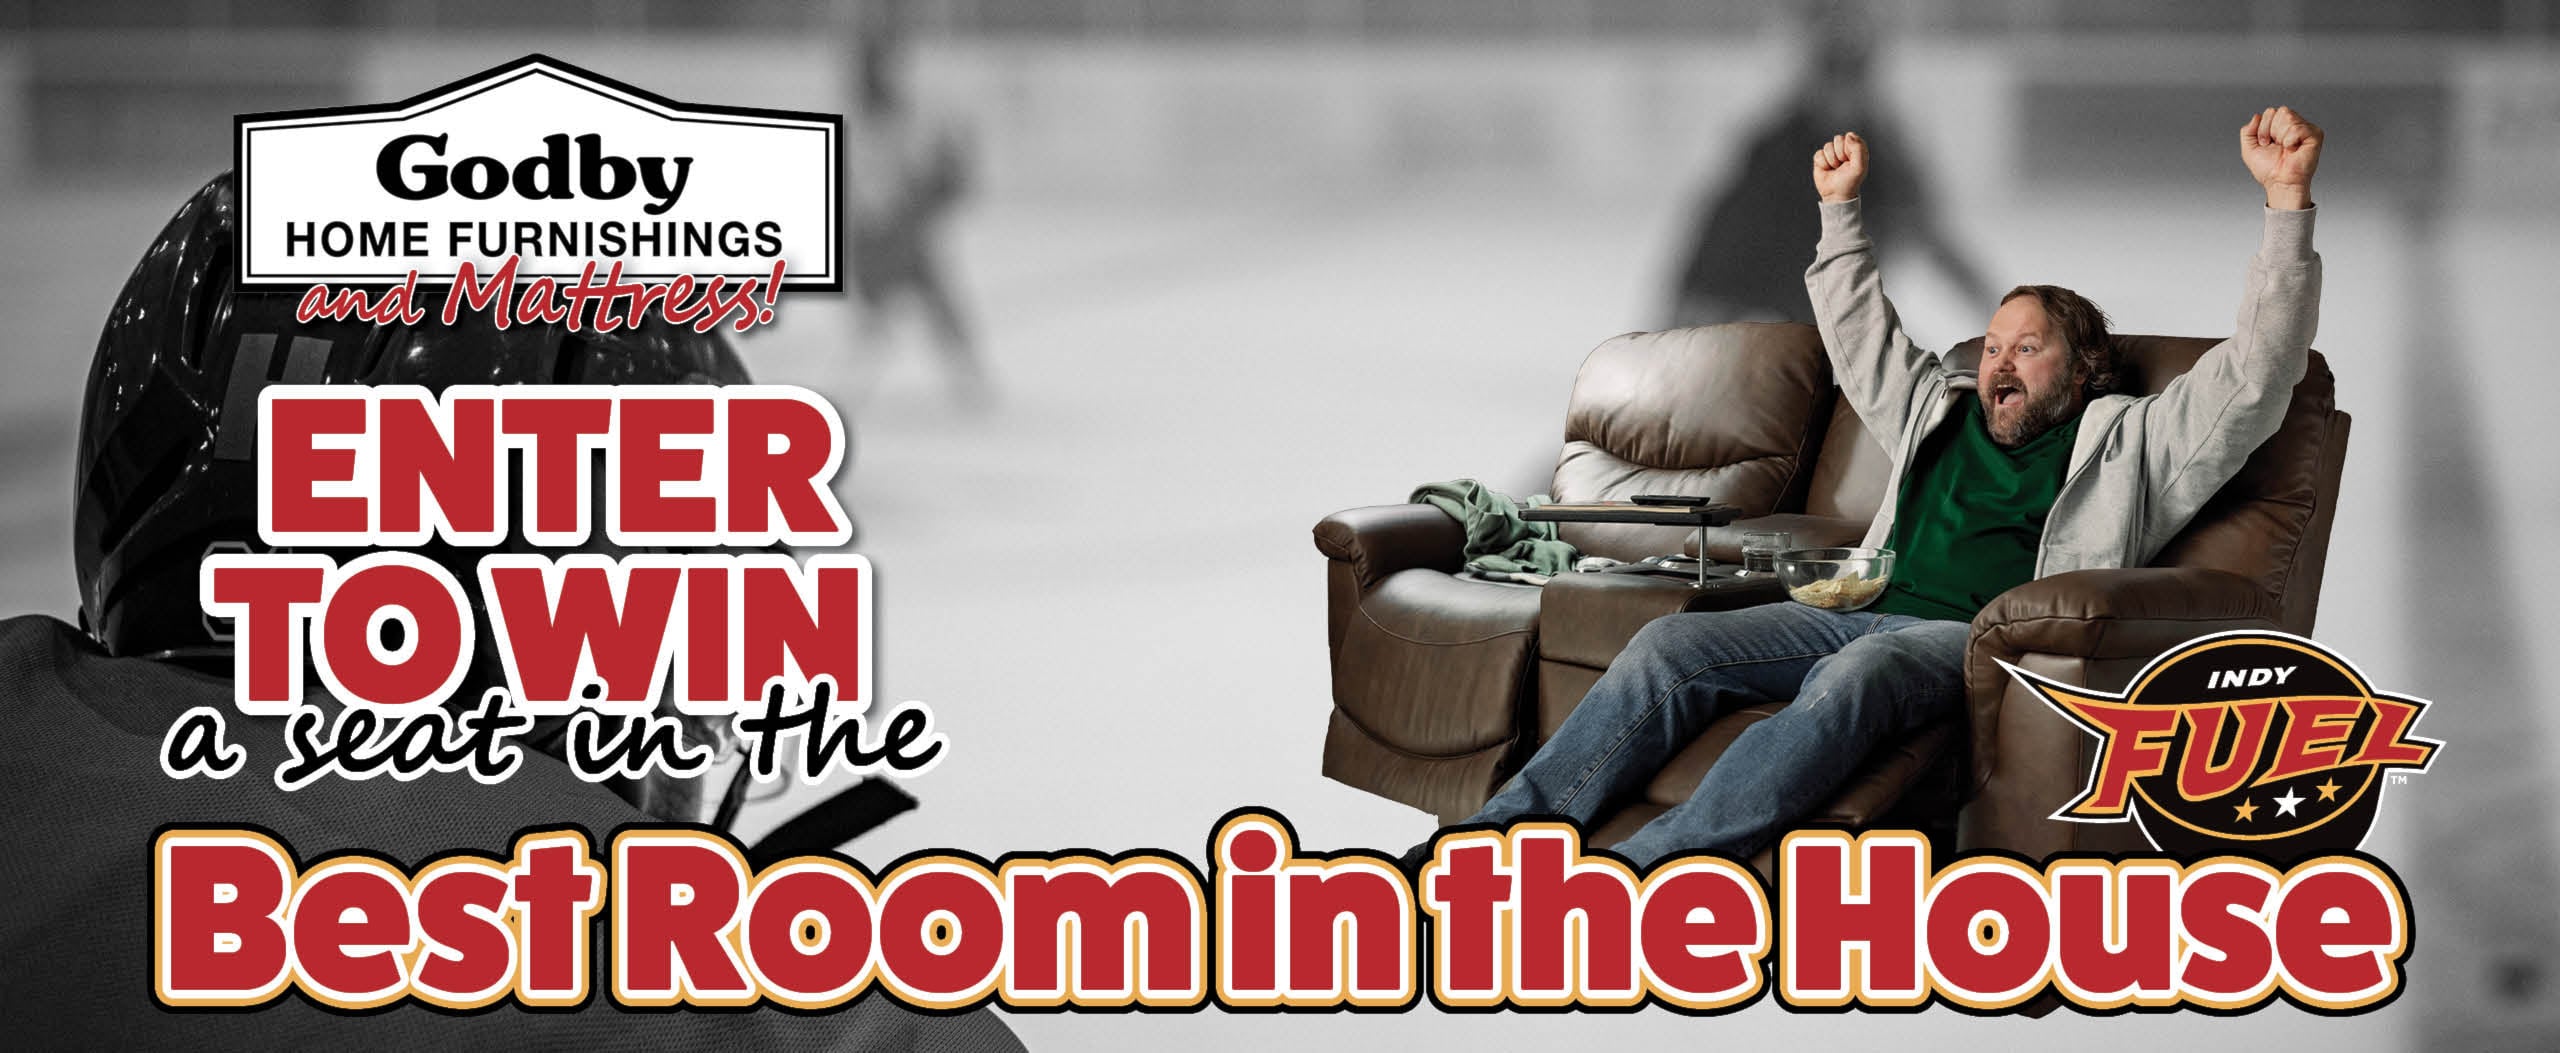 Indy Fuel - Best seat in the house sweepstakes